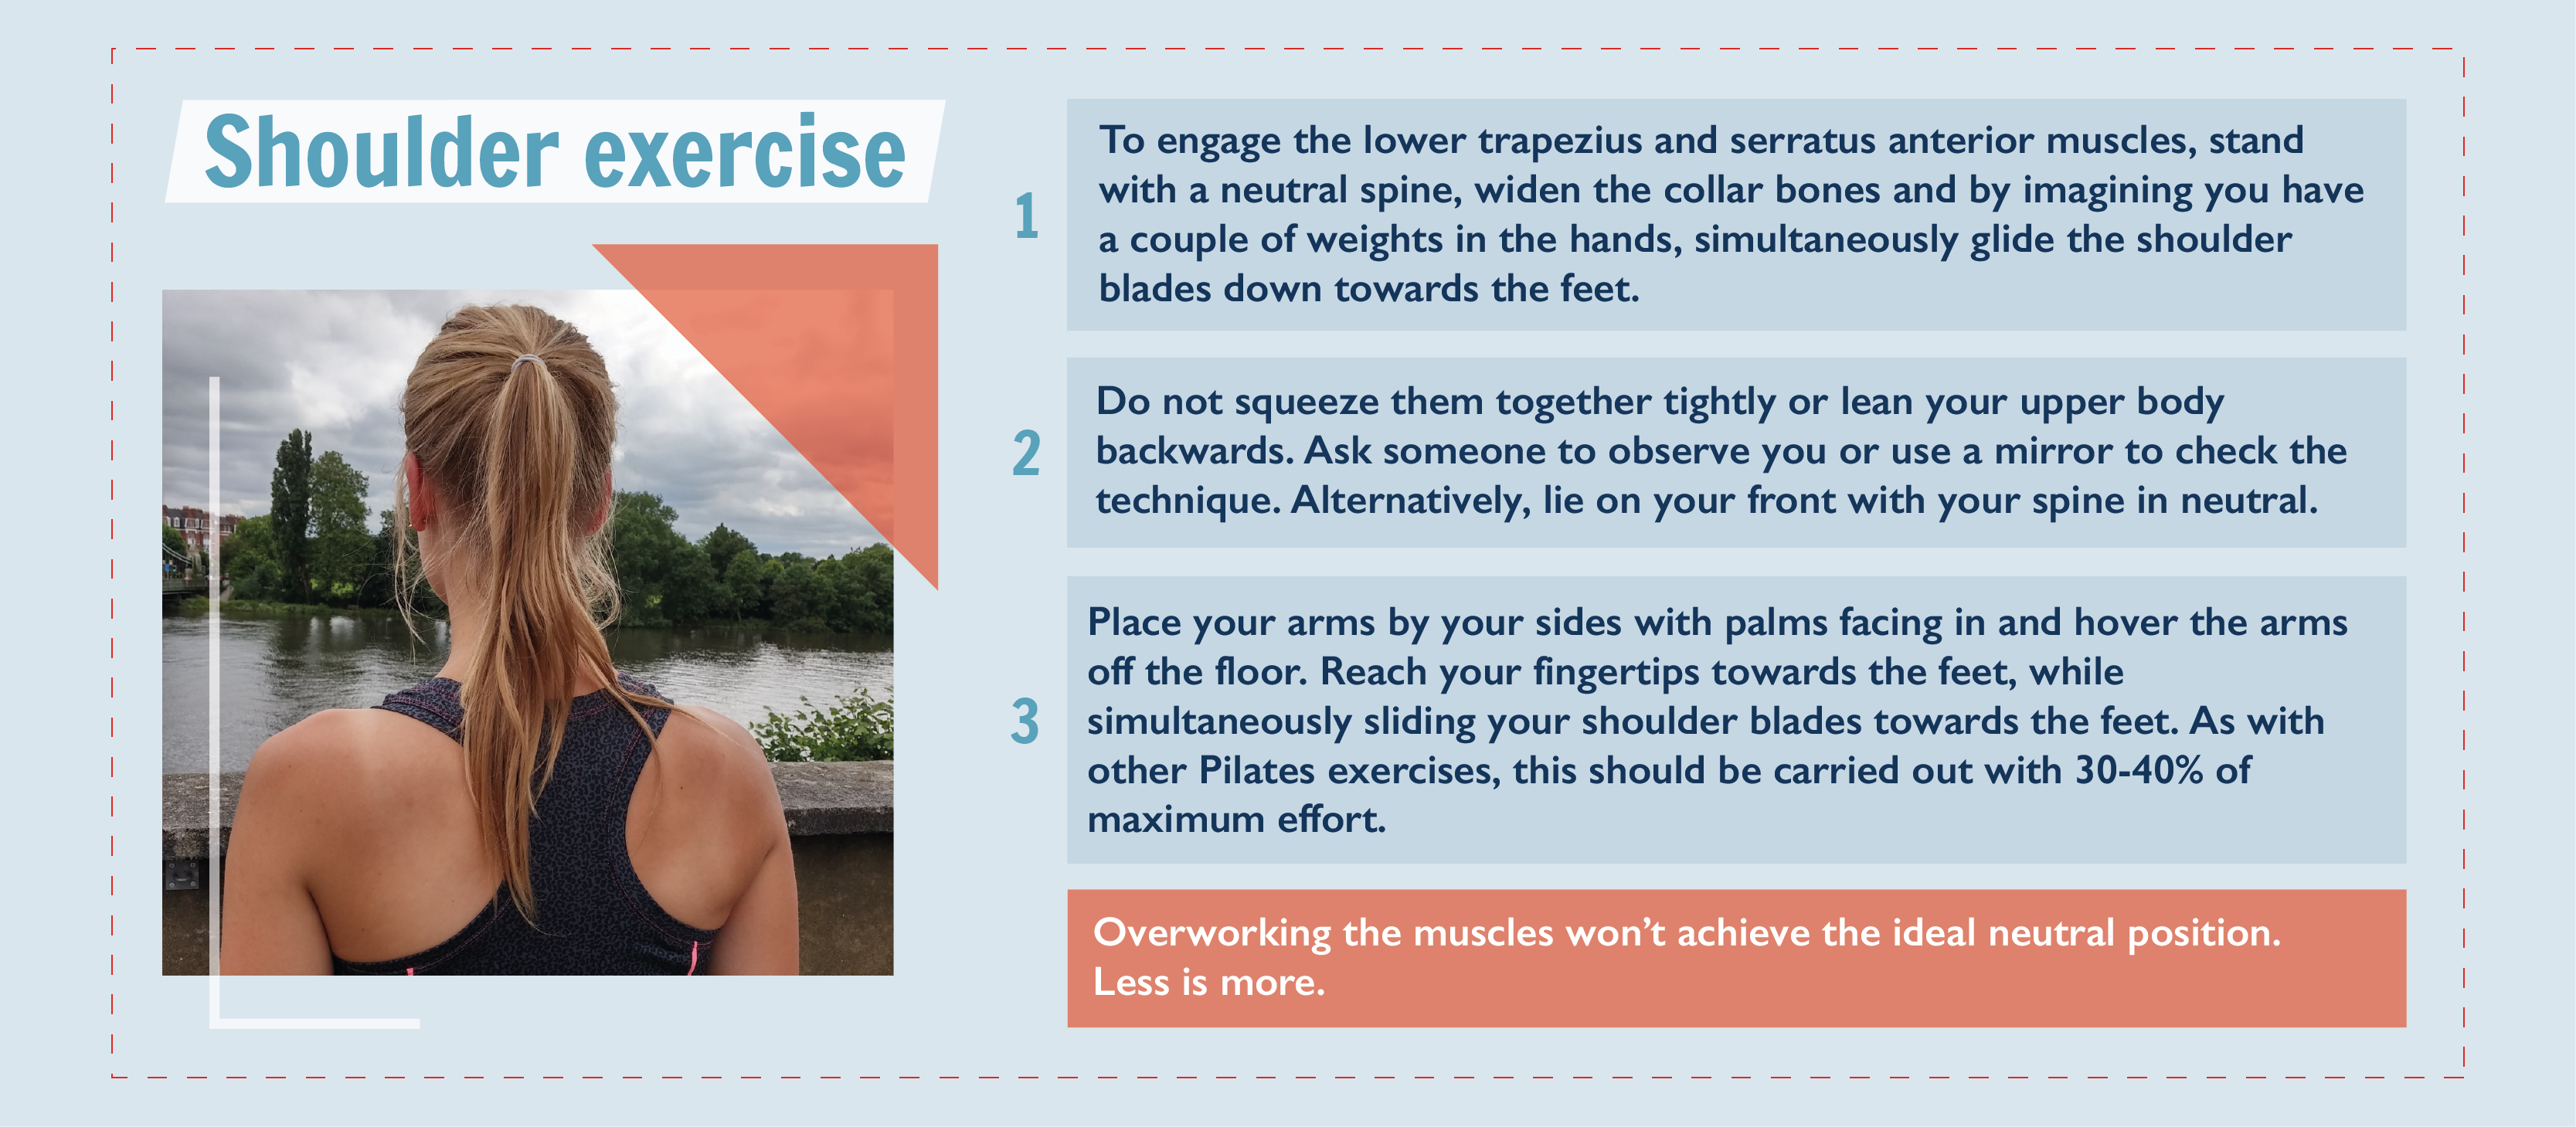 A graphic explaining how to do a shoulder exercise. To engage the lower trapezius and serratus anterior muscles, stand with a neutral spine, widen the collar bones and by imagining you have a couple of weights in the hands, simultaneously glide the shoulder blades down towards the feet. Do not squeeze them together tightly or lean your upper body backwards. Ask someone to observe you or use a mirror to check the technique. Alternatively, lie on your front with your spine in neutral. Place your arms by your sides with palms facing in and hover the arms off the floor. Reach your fingertips towards the feet, while simultaneously sliding your shoulder blades towards the feet. As with other Pilates exercises, this should be carried out with 30-40% of maximum effort. Overworking the muscles won’t achieve the ideal neutral position. Less is more. 